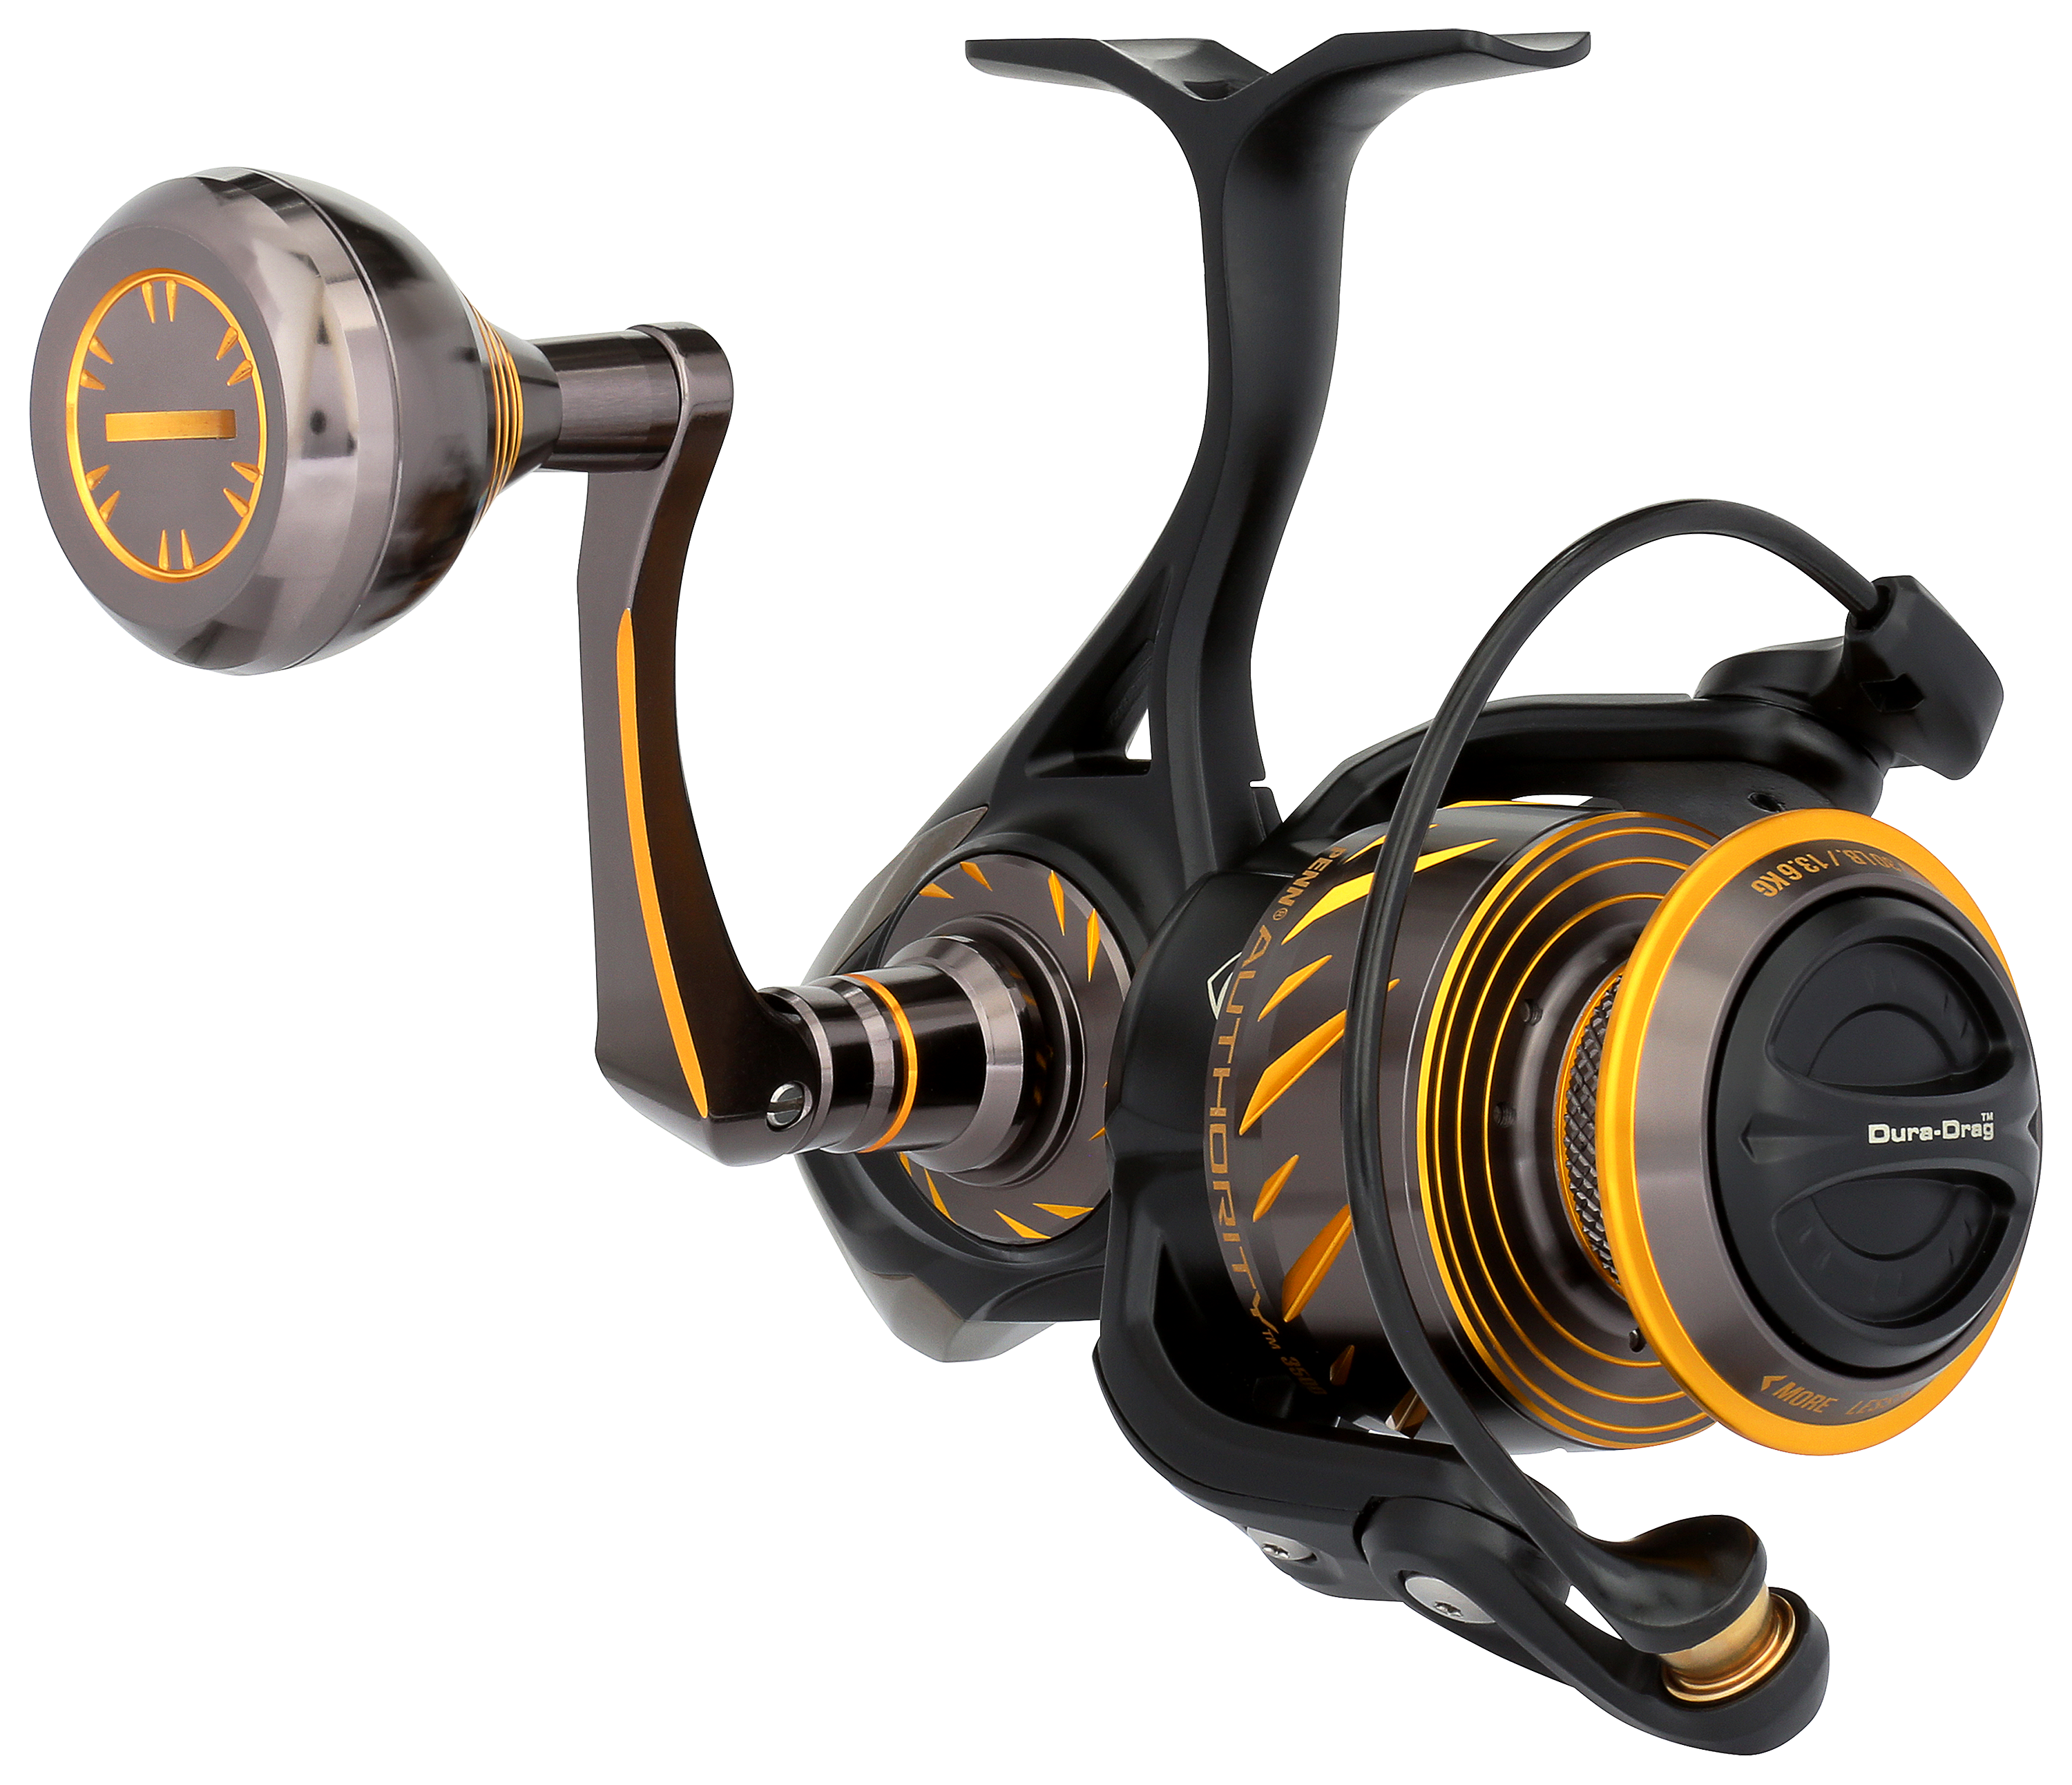 Penn Authority Spinning Reel - ATH3500